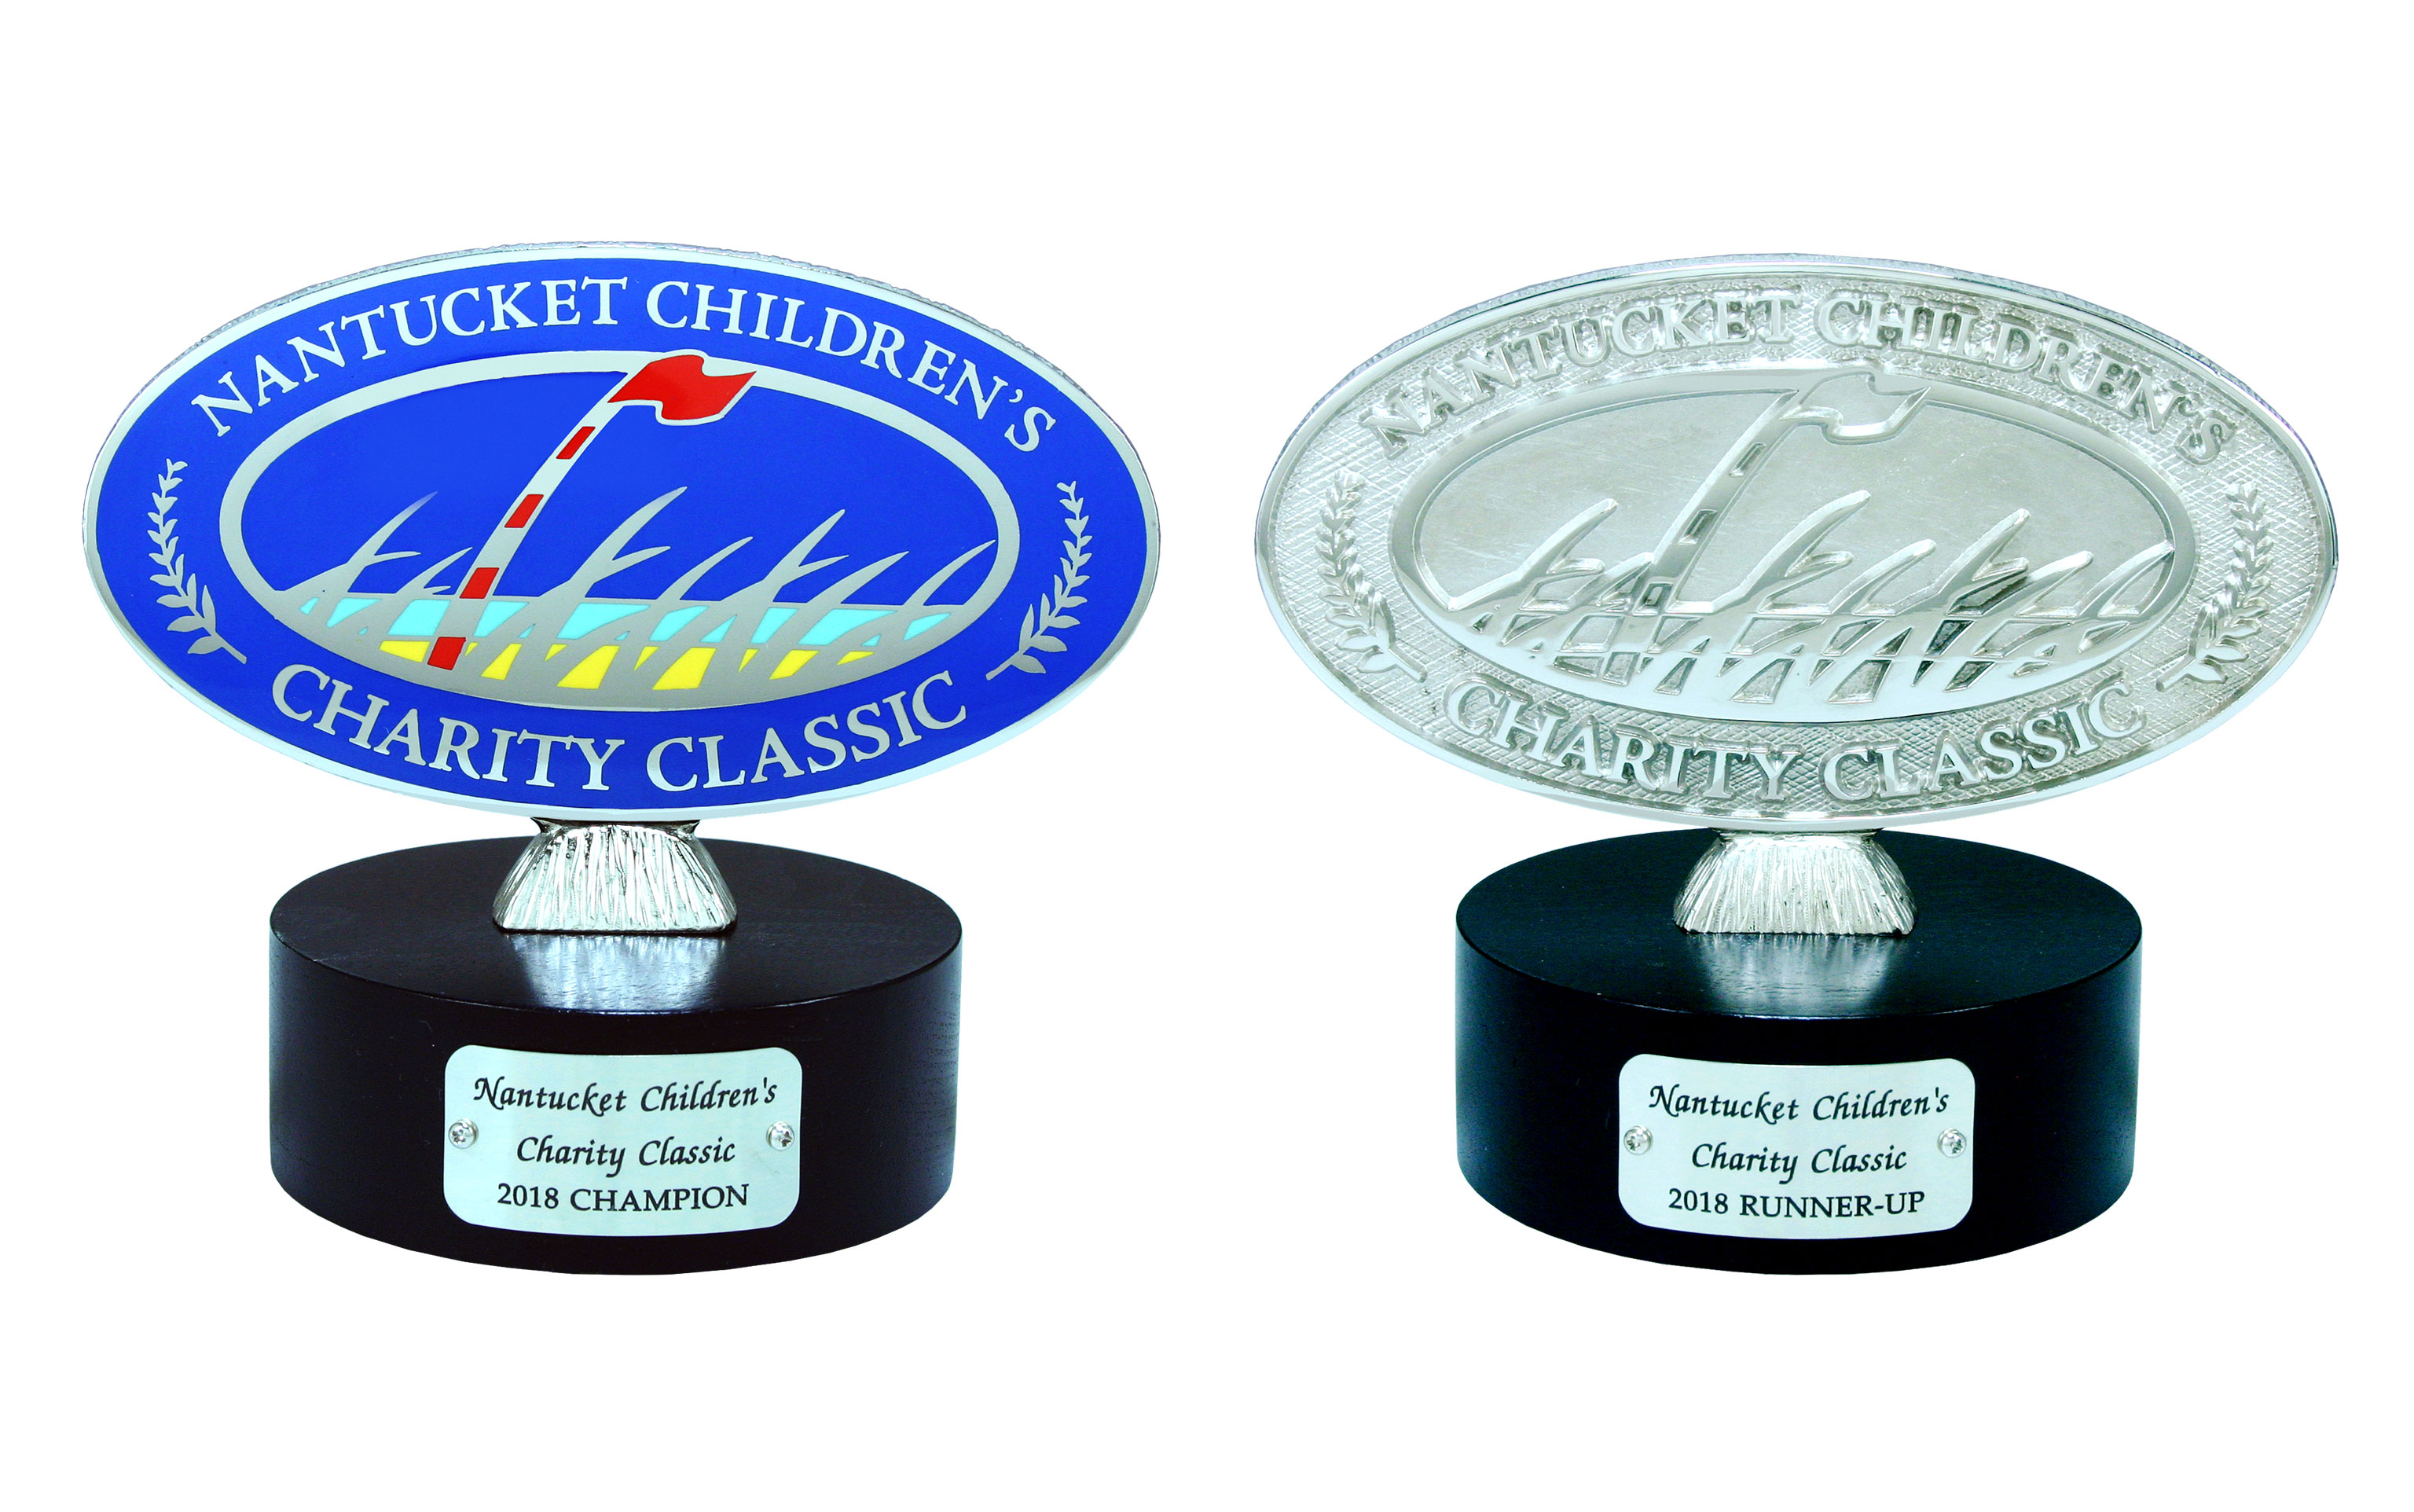 Nantucket Golf Club Children's Charity Classic 2D awards made by Malcolm DeMille